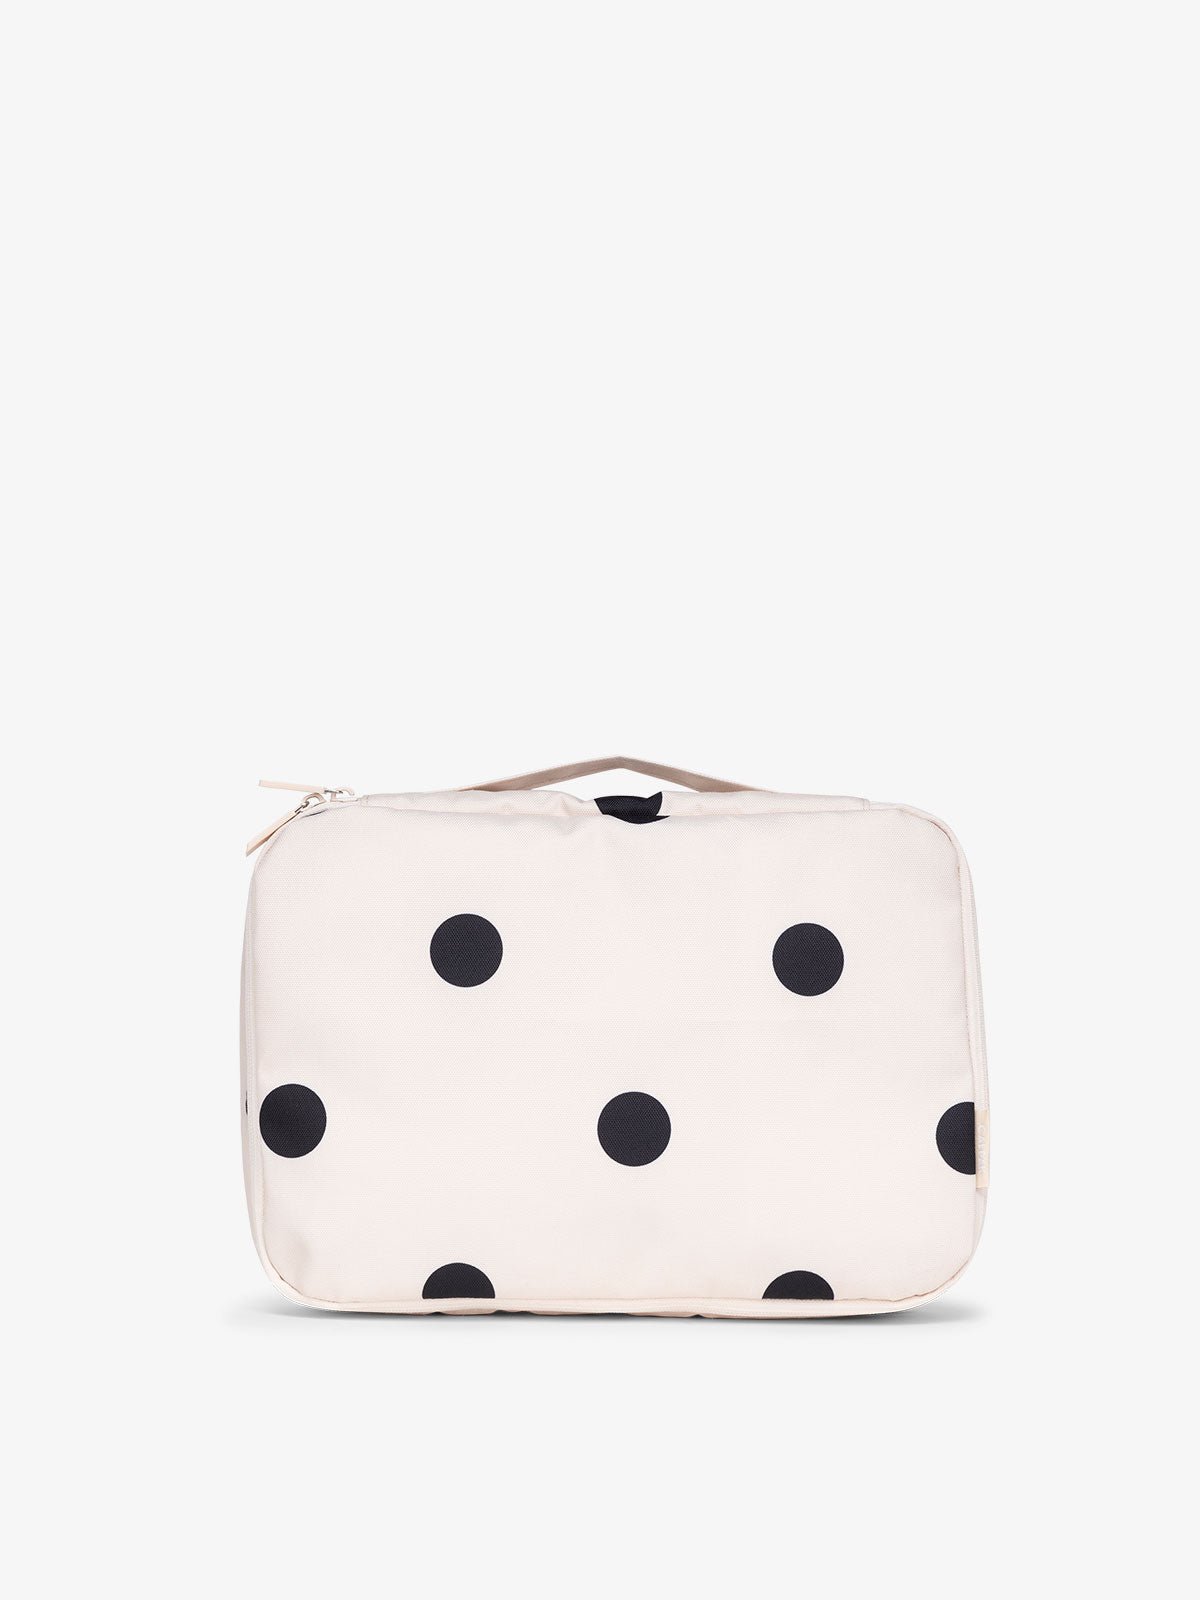 CALPAK small packing cubes with top handle in polka dot